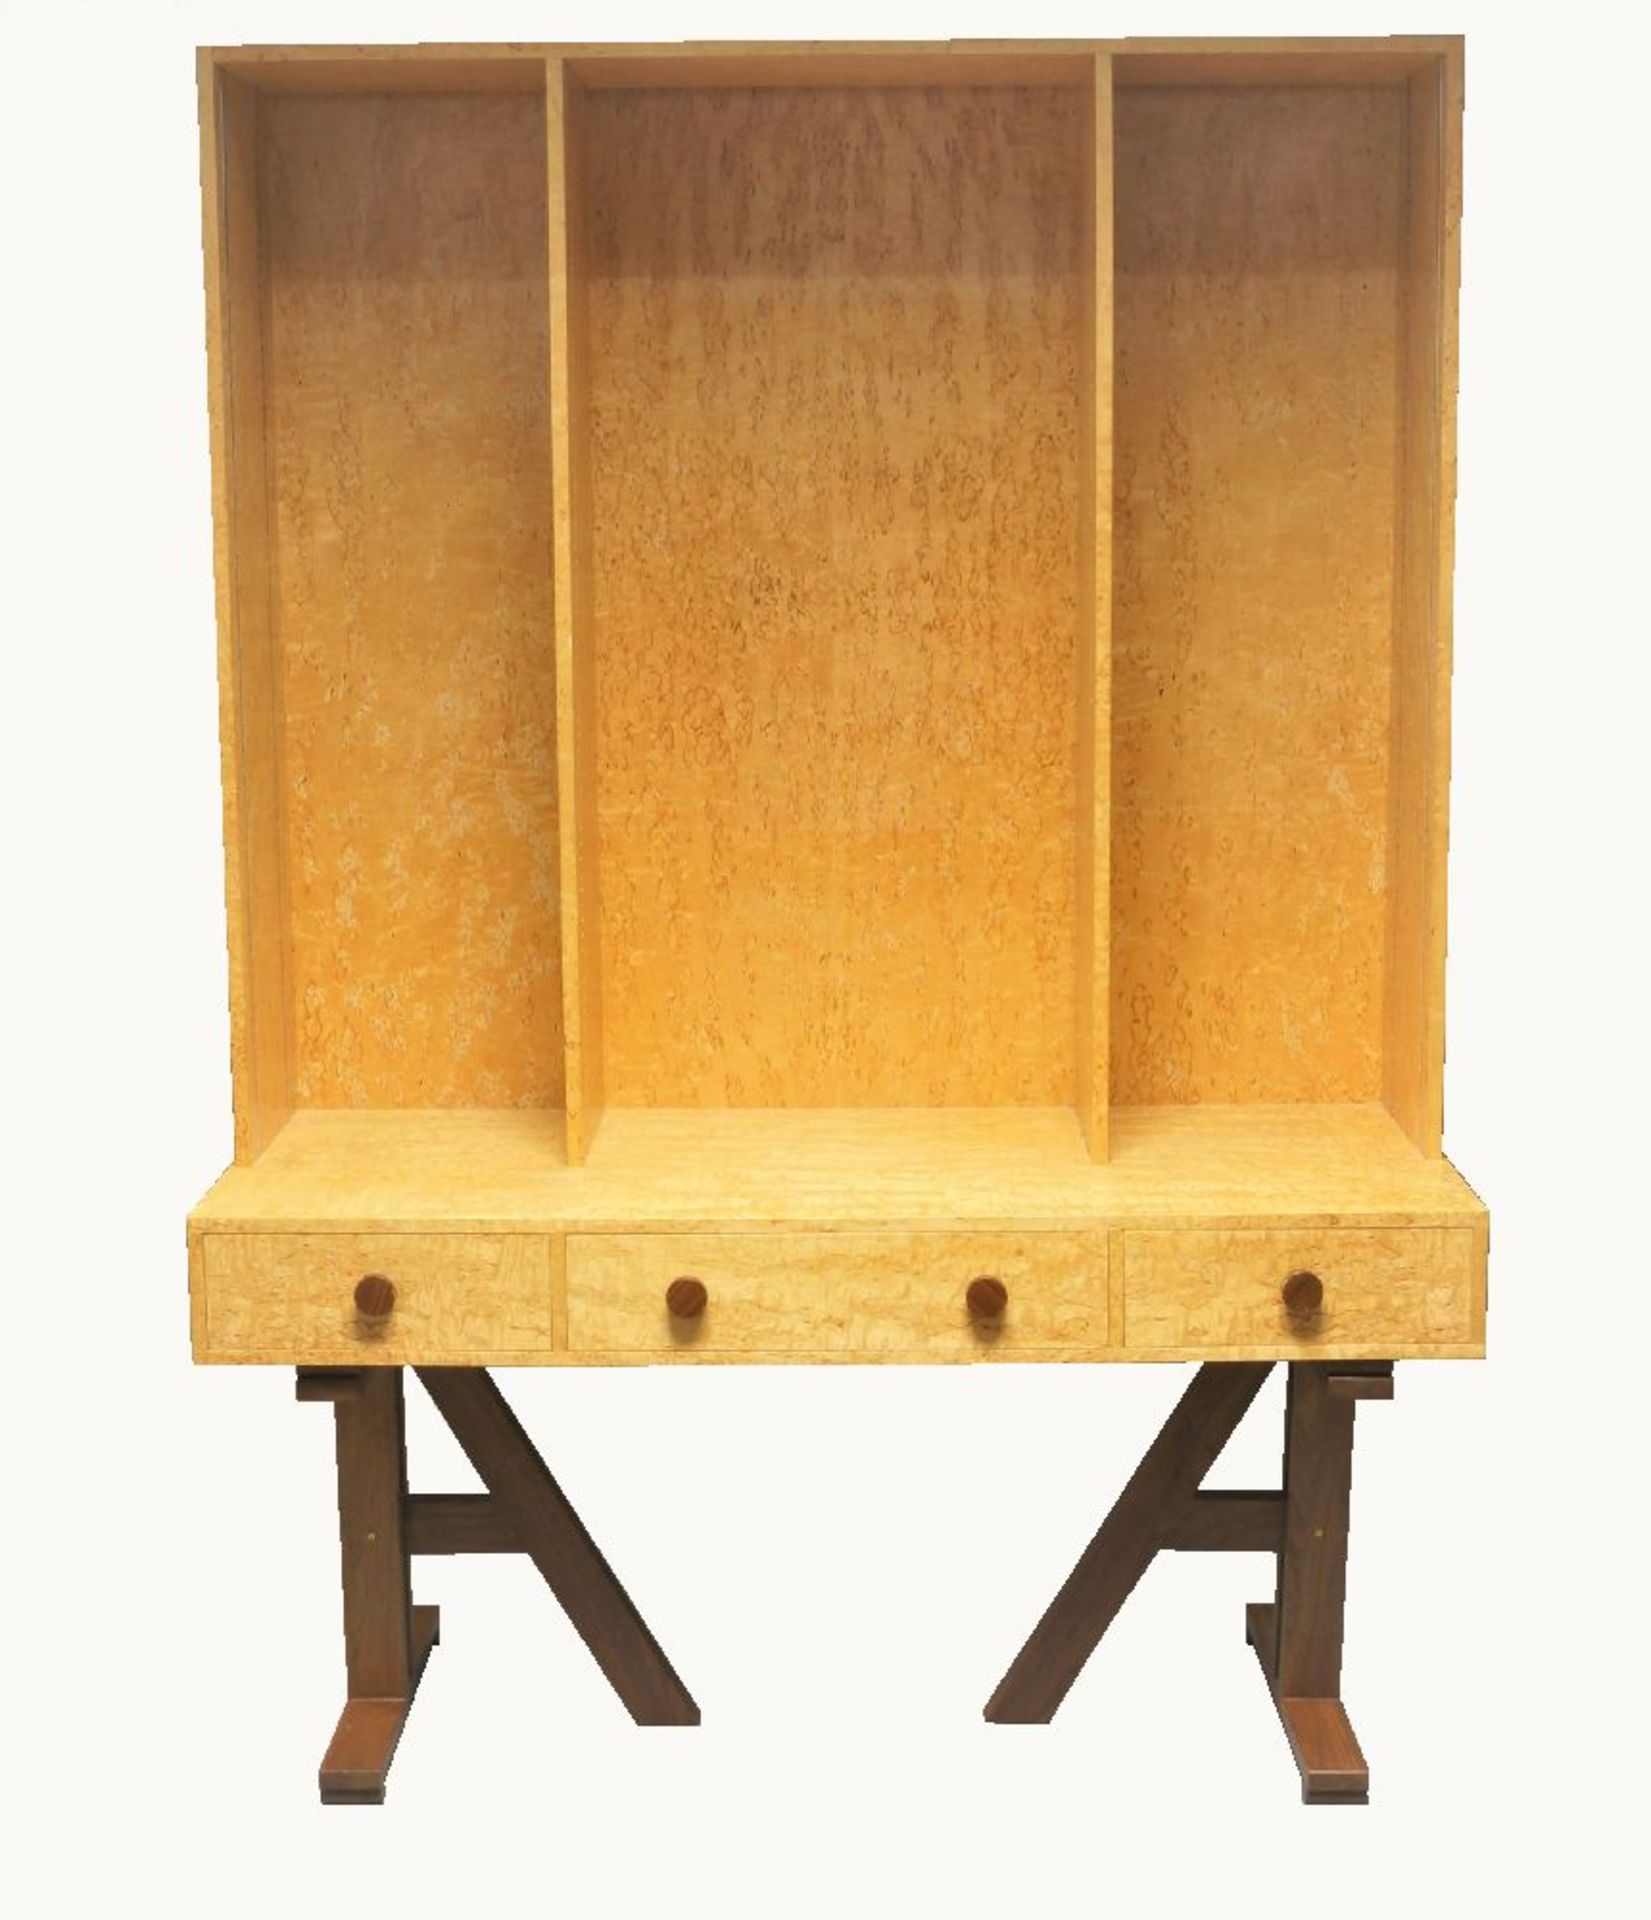 A birds-eye maple veneered dresser, late 20th century, adjustable shelving section, with